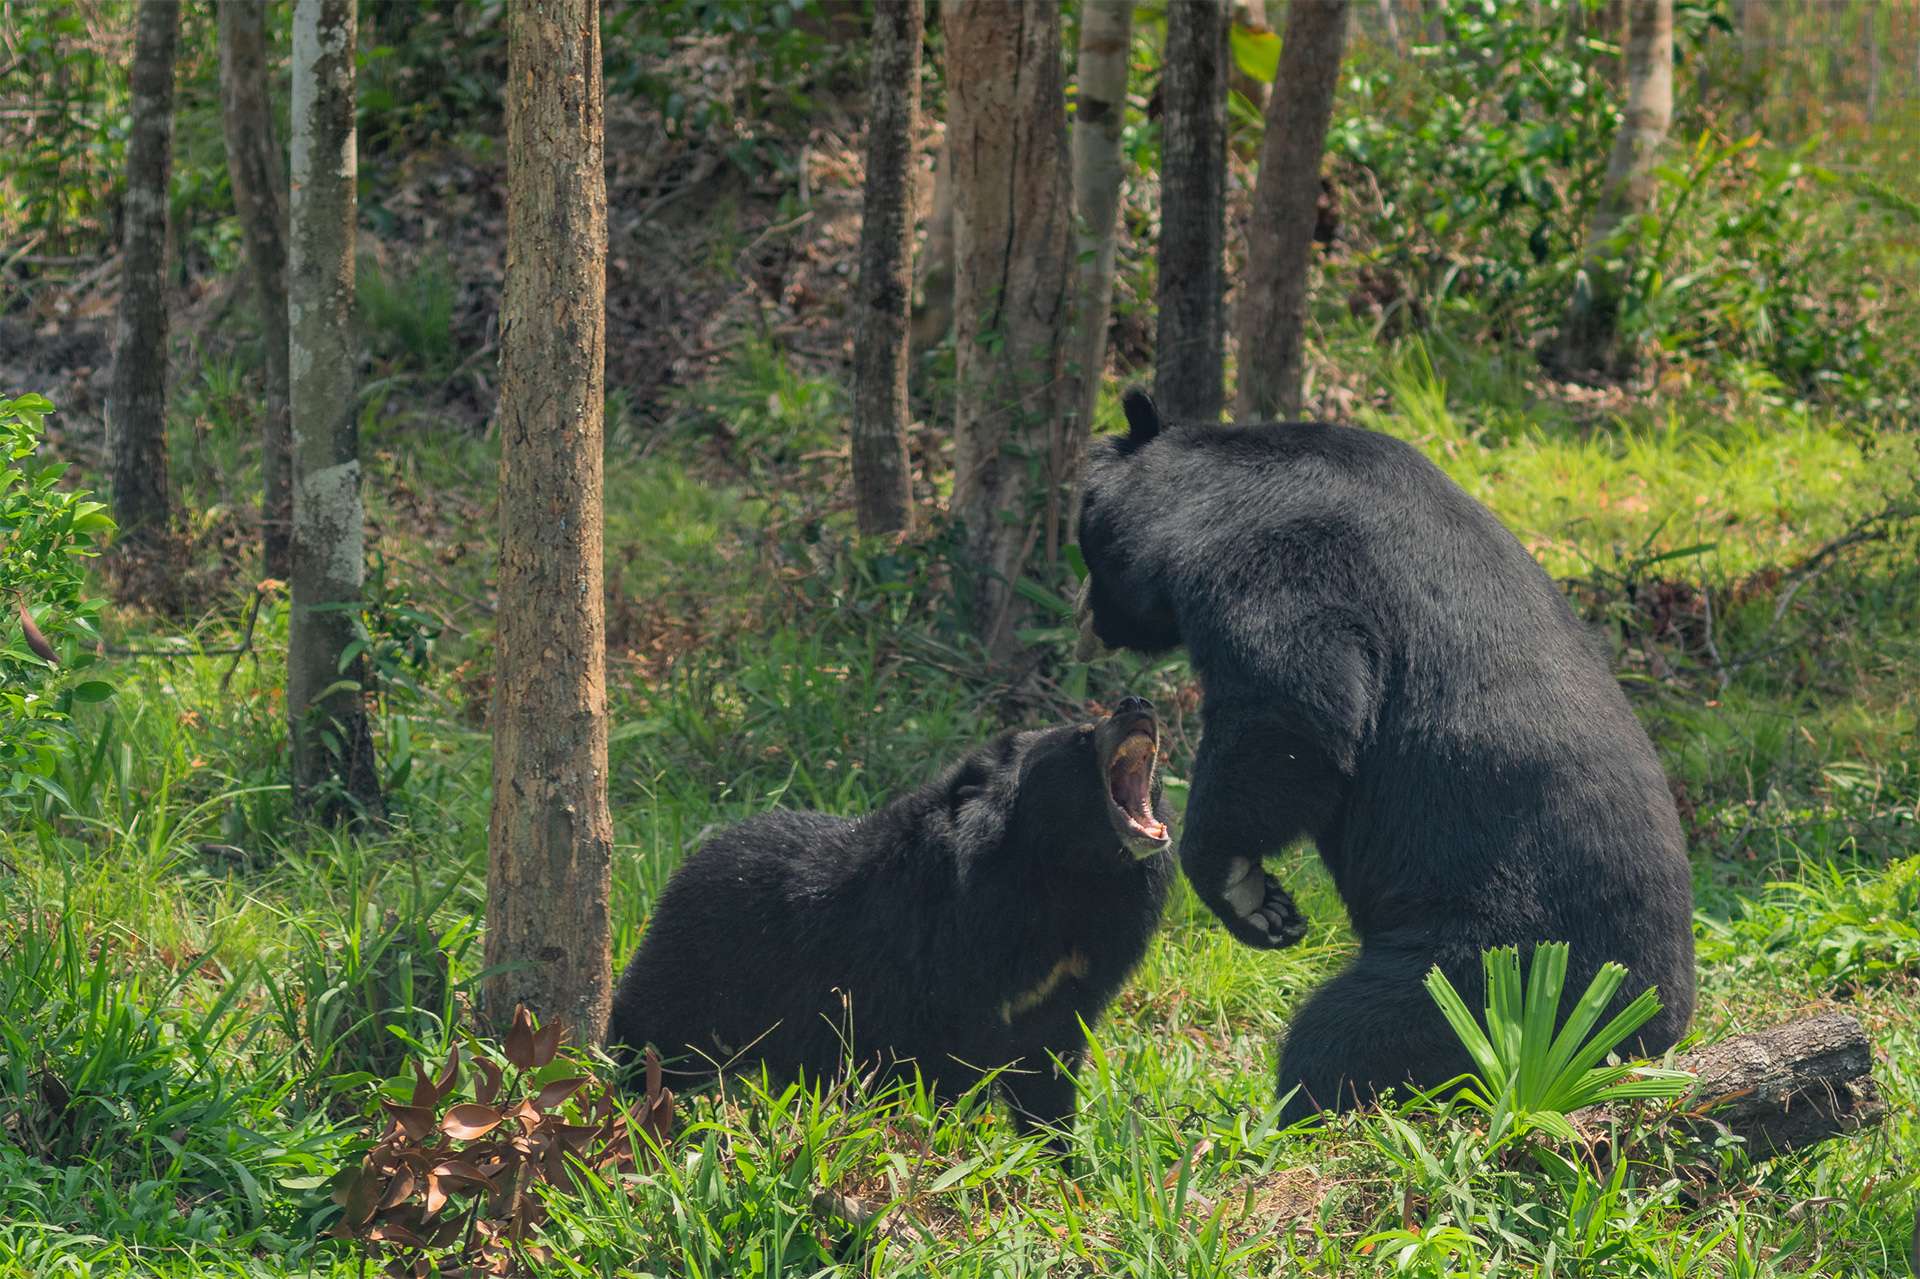 The quarrel of two Asiatic black bears (Ursus thibetanus), also known as the moon bear or the Himalayan bear.